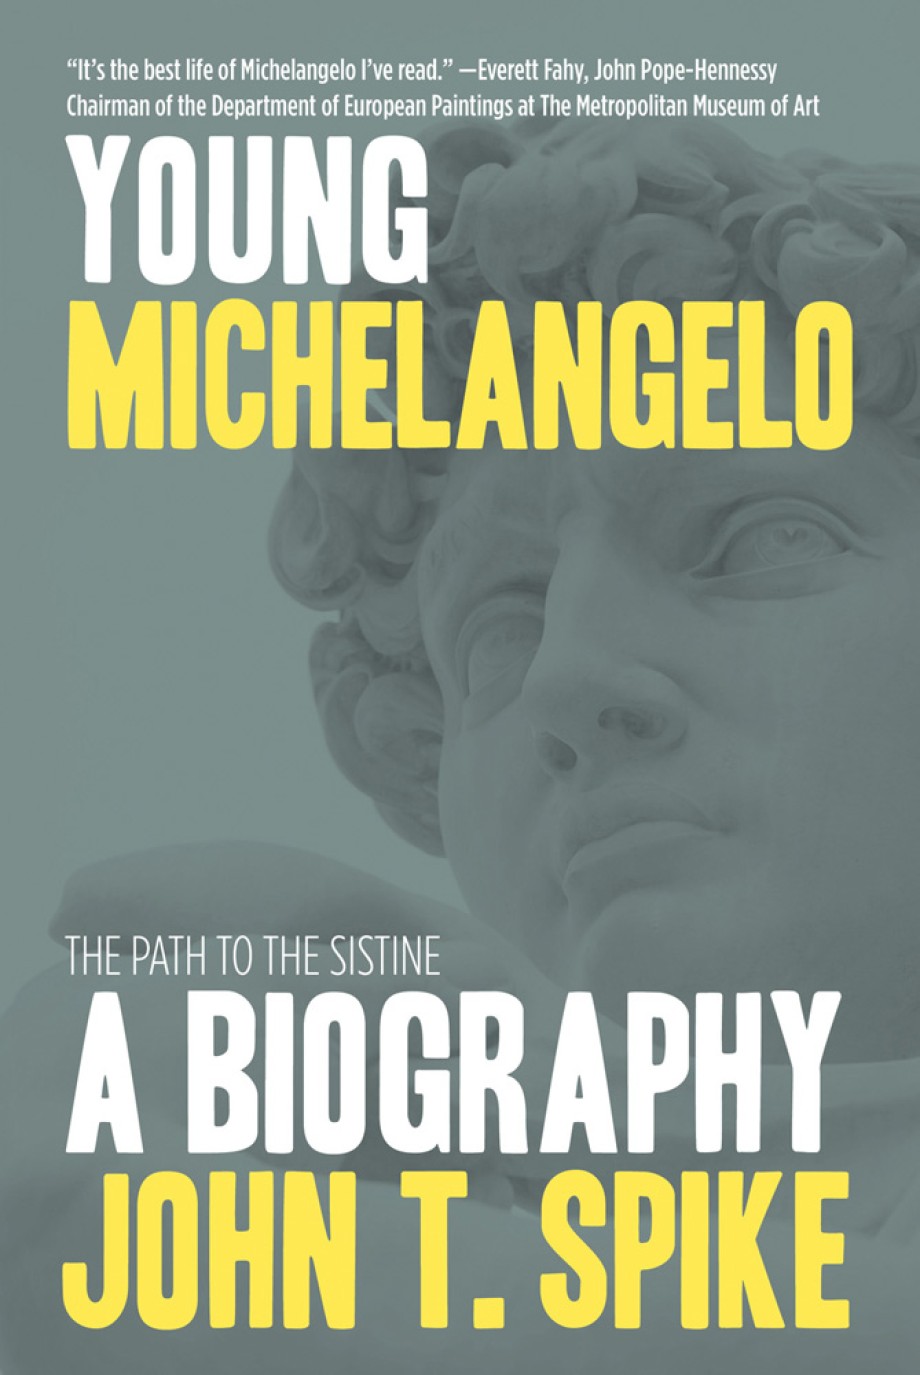 Young Michelangelo The Path to the Sistine: A Biography